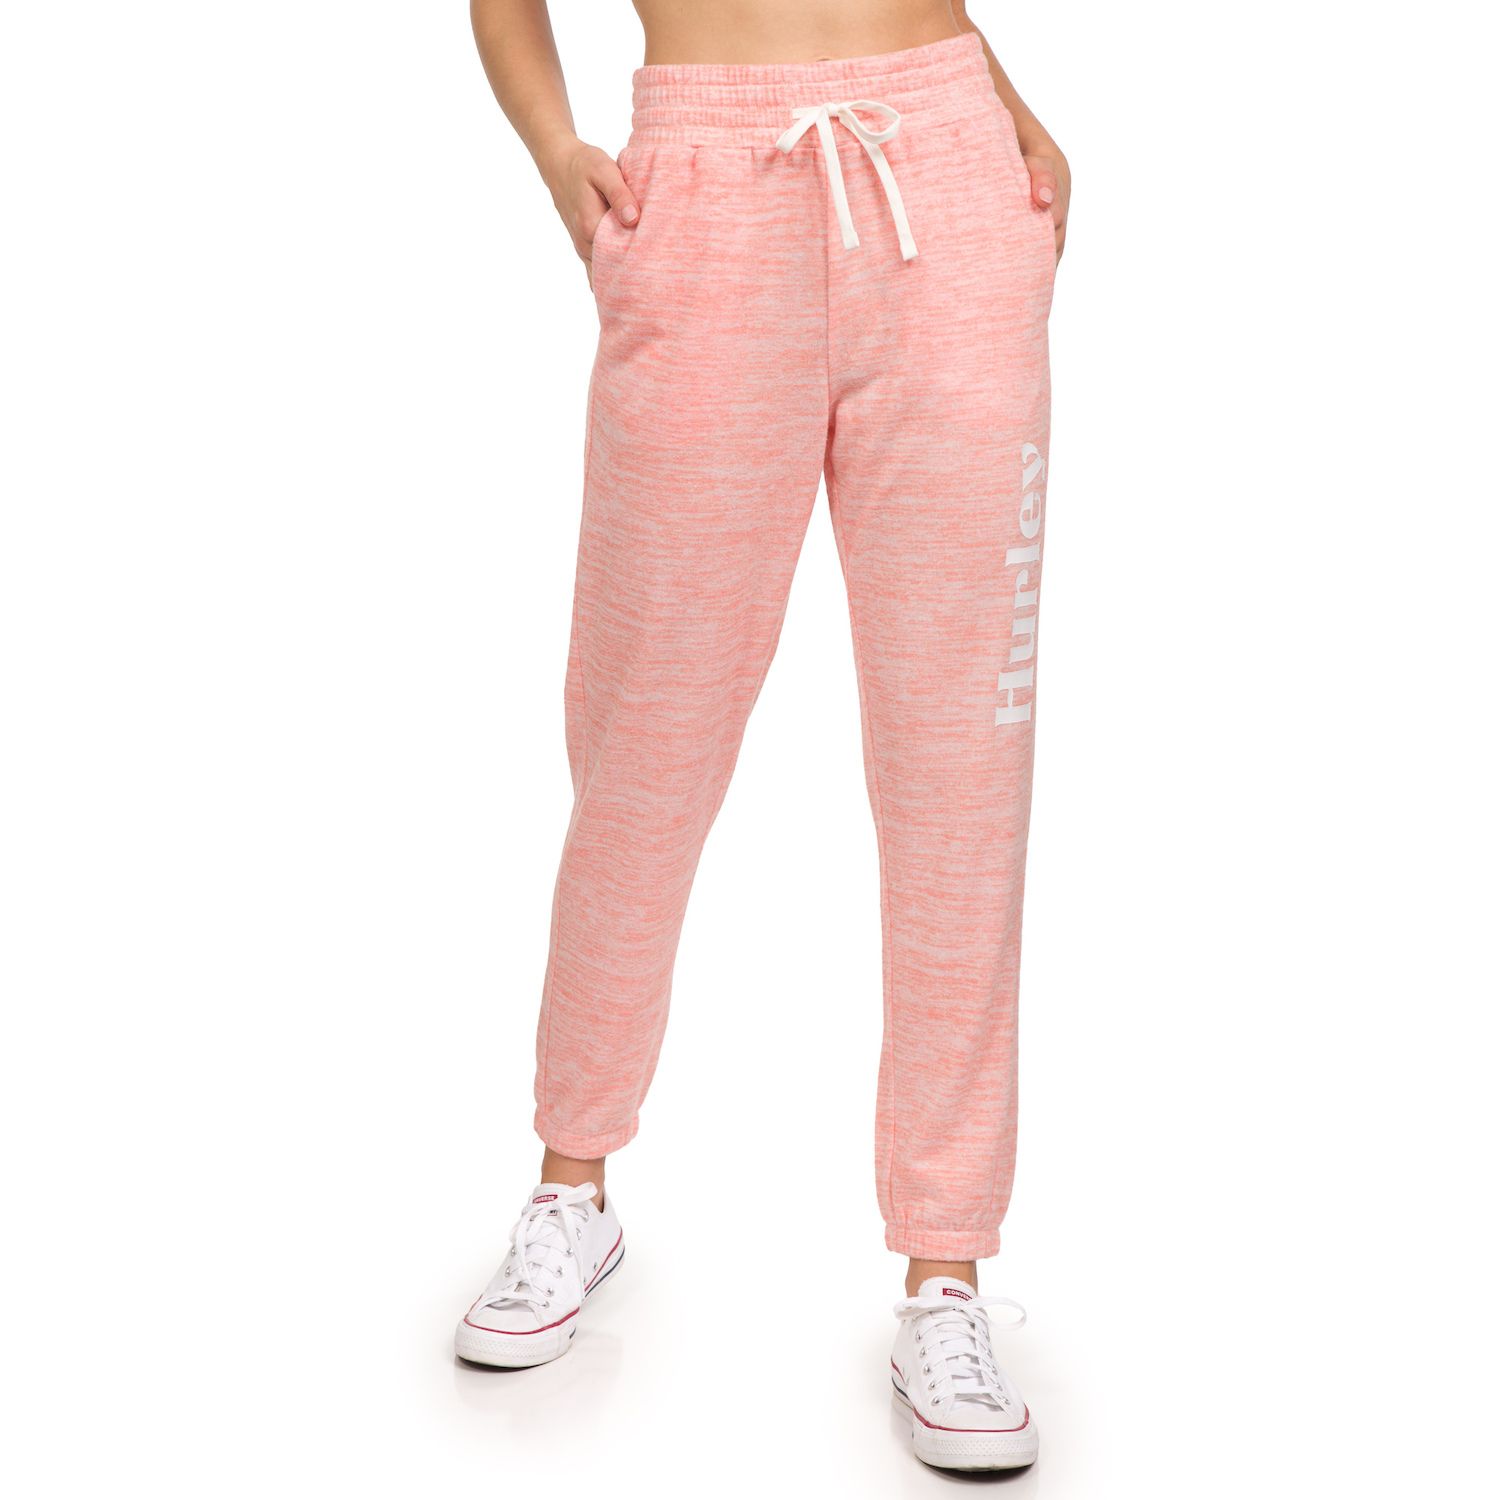 Image for Hurley Juniors' Hacci Fleece Joggers at Kohl's.